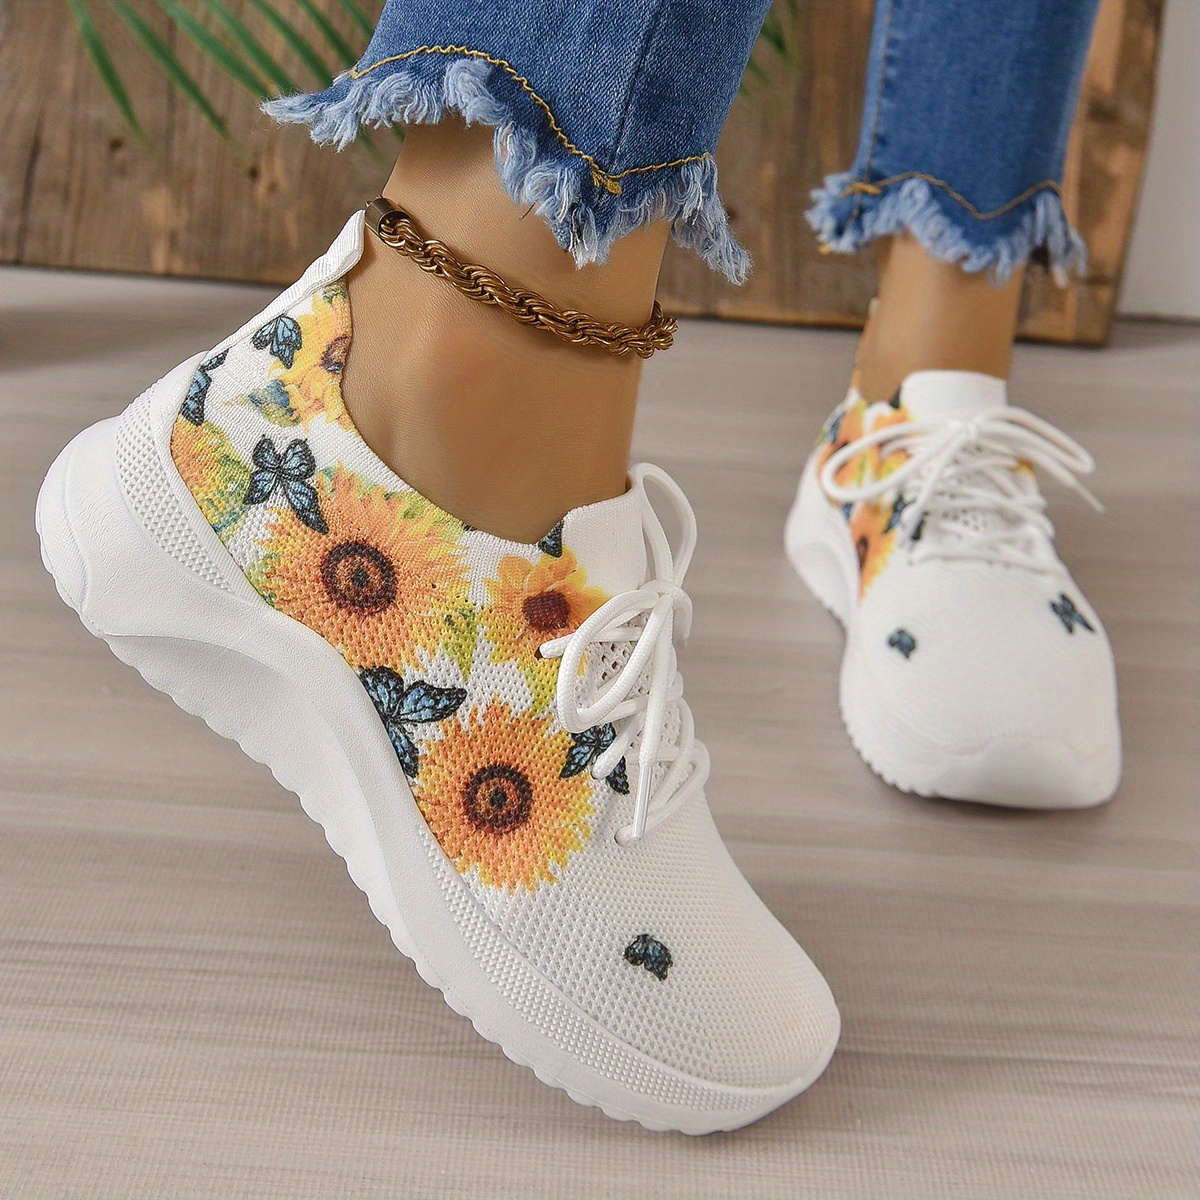 Womens Sunflower Print Sneakers, Butterfly Print Lace Up Running and Tennis Shoes, Casual Low Top Shoes